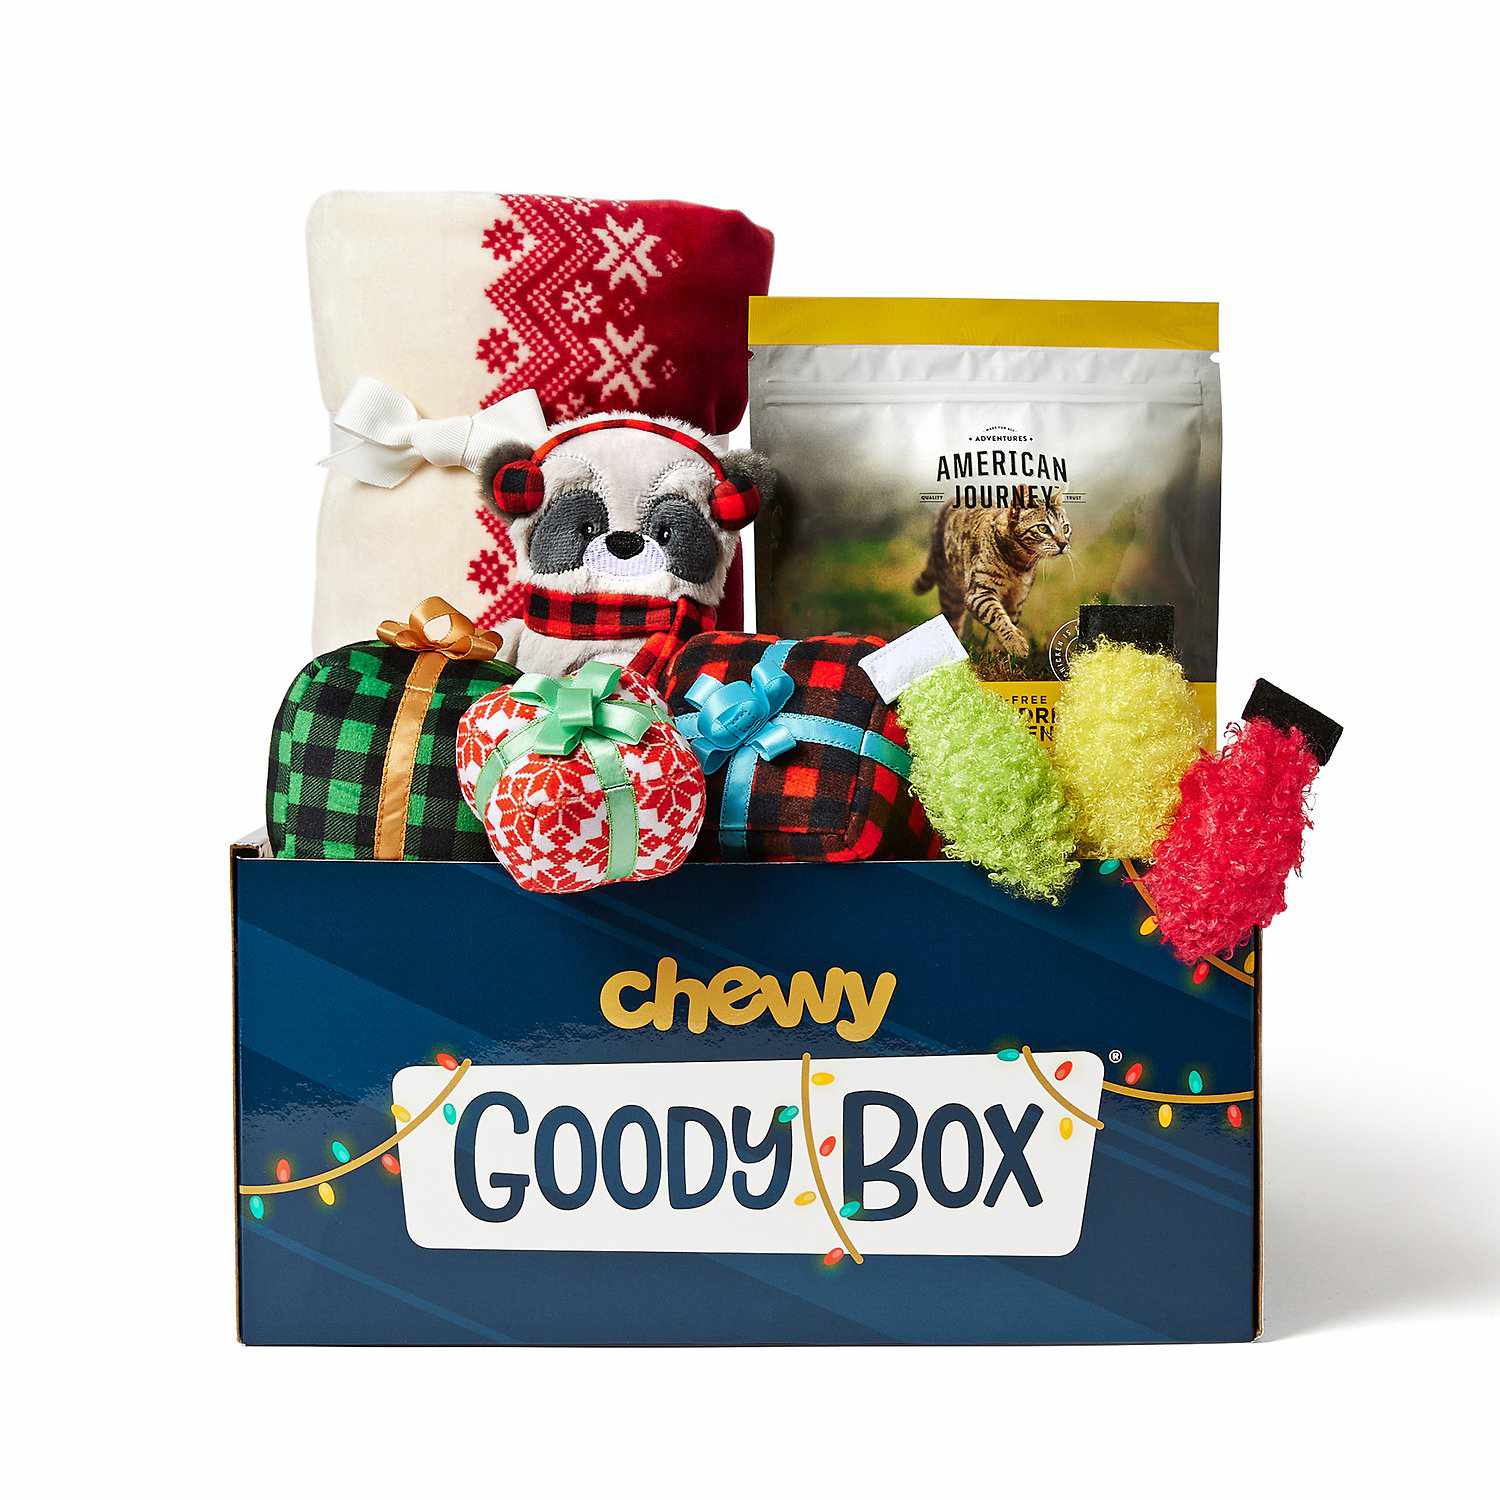 goody box containing pet toys, treats, and blanket